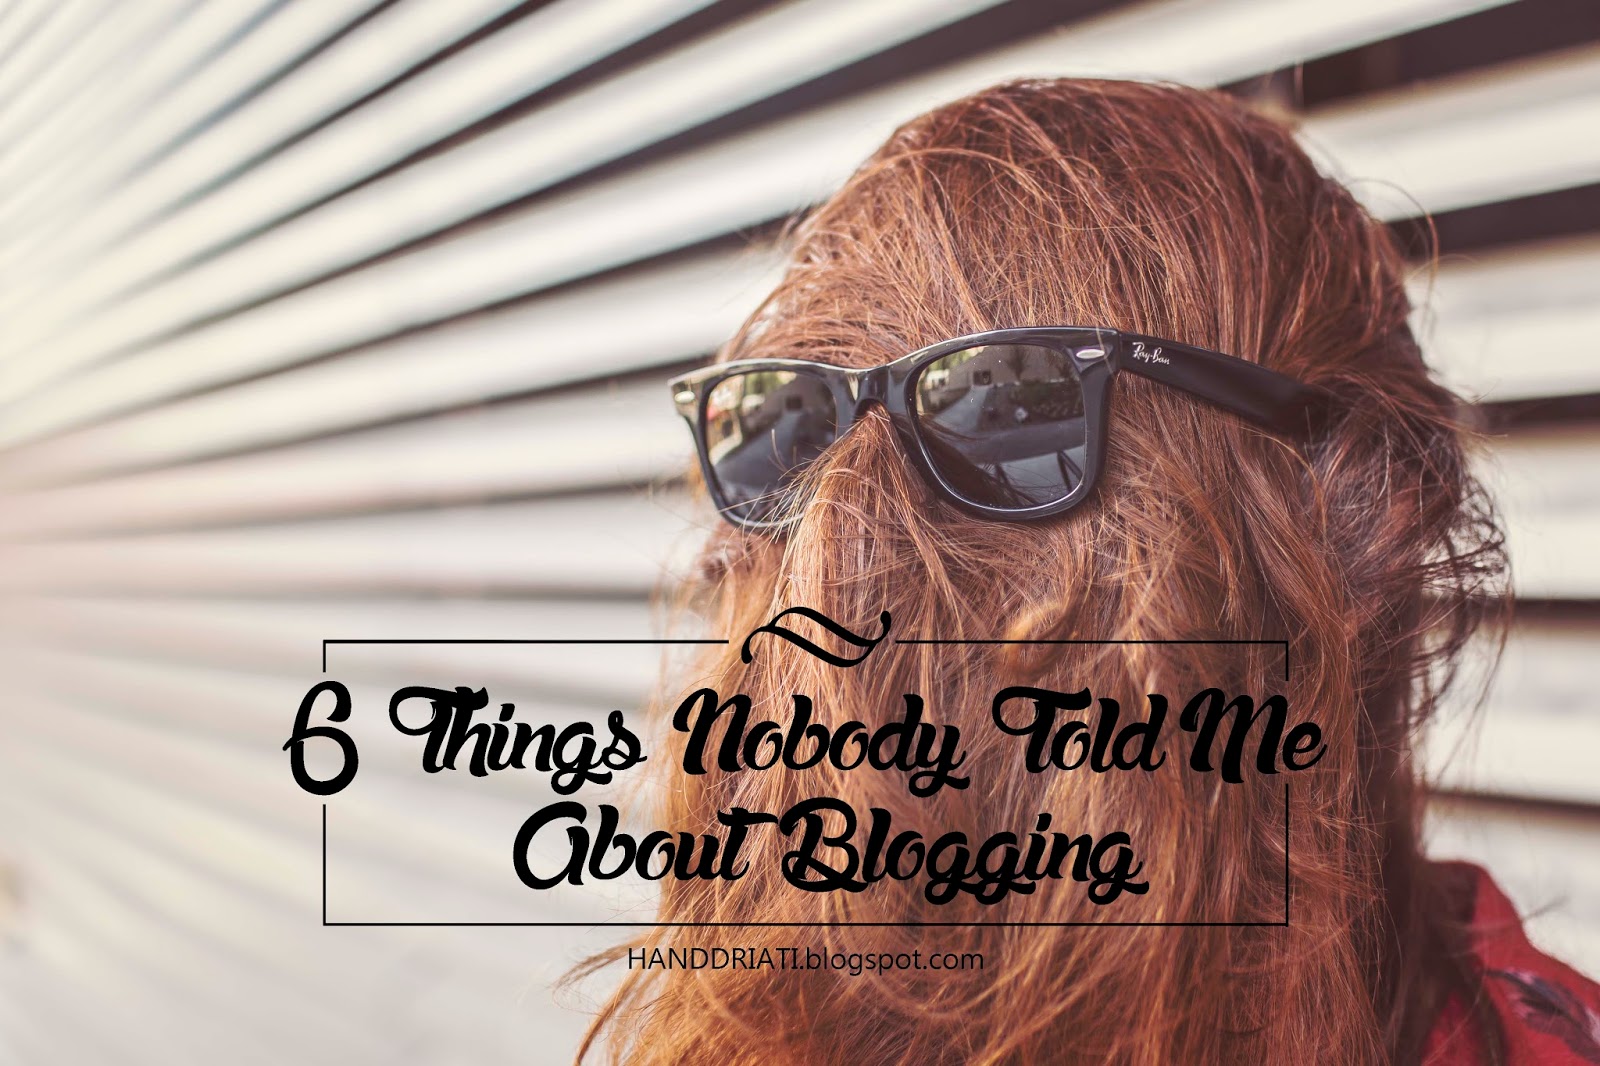 6 Things Nobody Told Me About Blogging